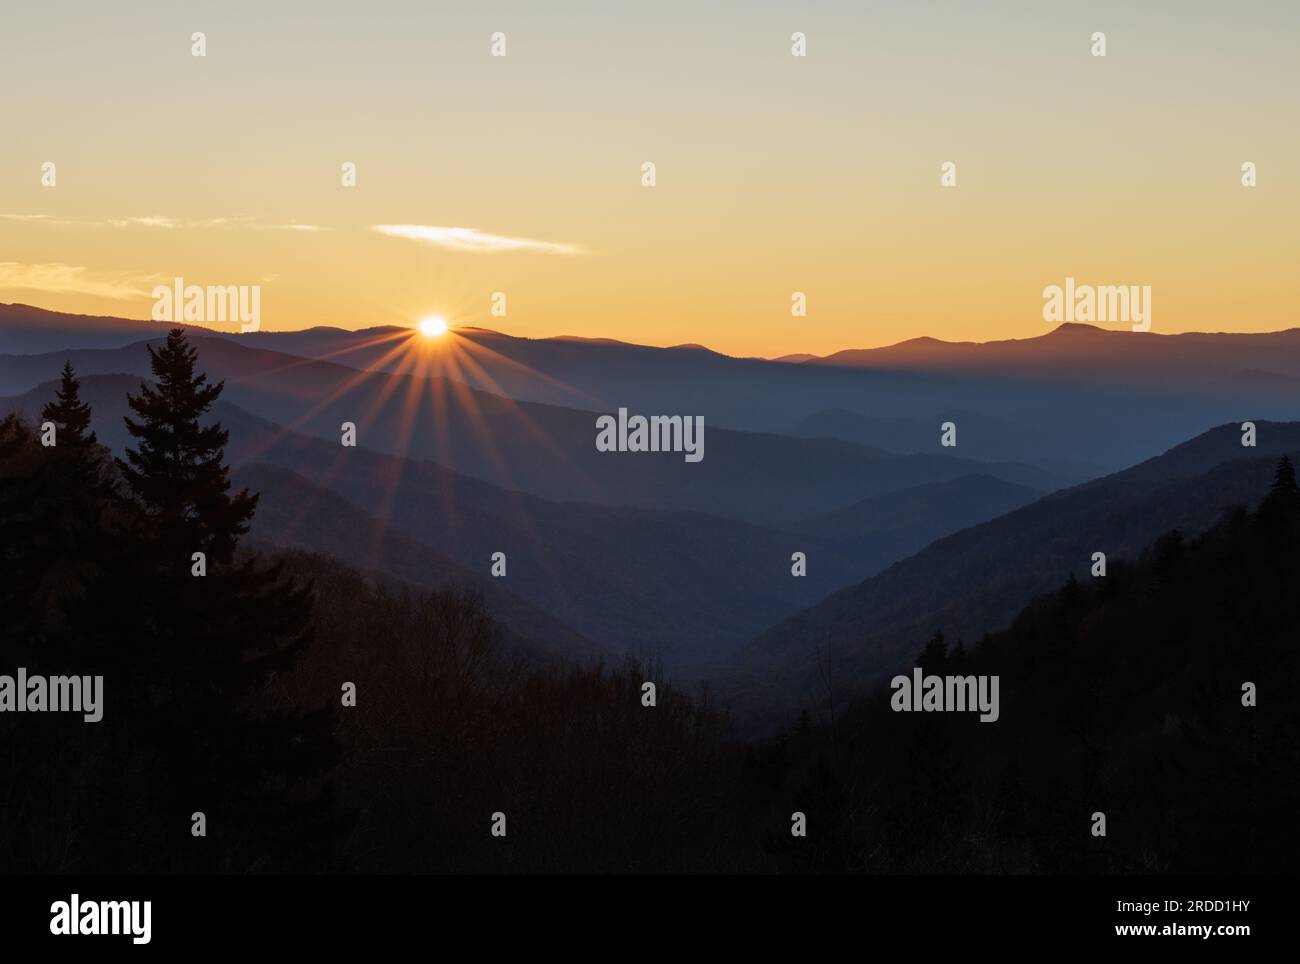 The sun rises over Great Smoky Mountains National Park at Luftee Gap. Stock Photo